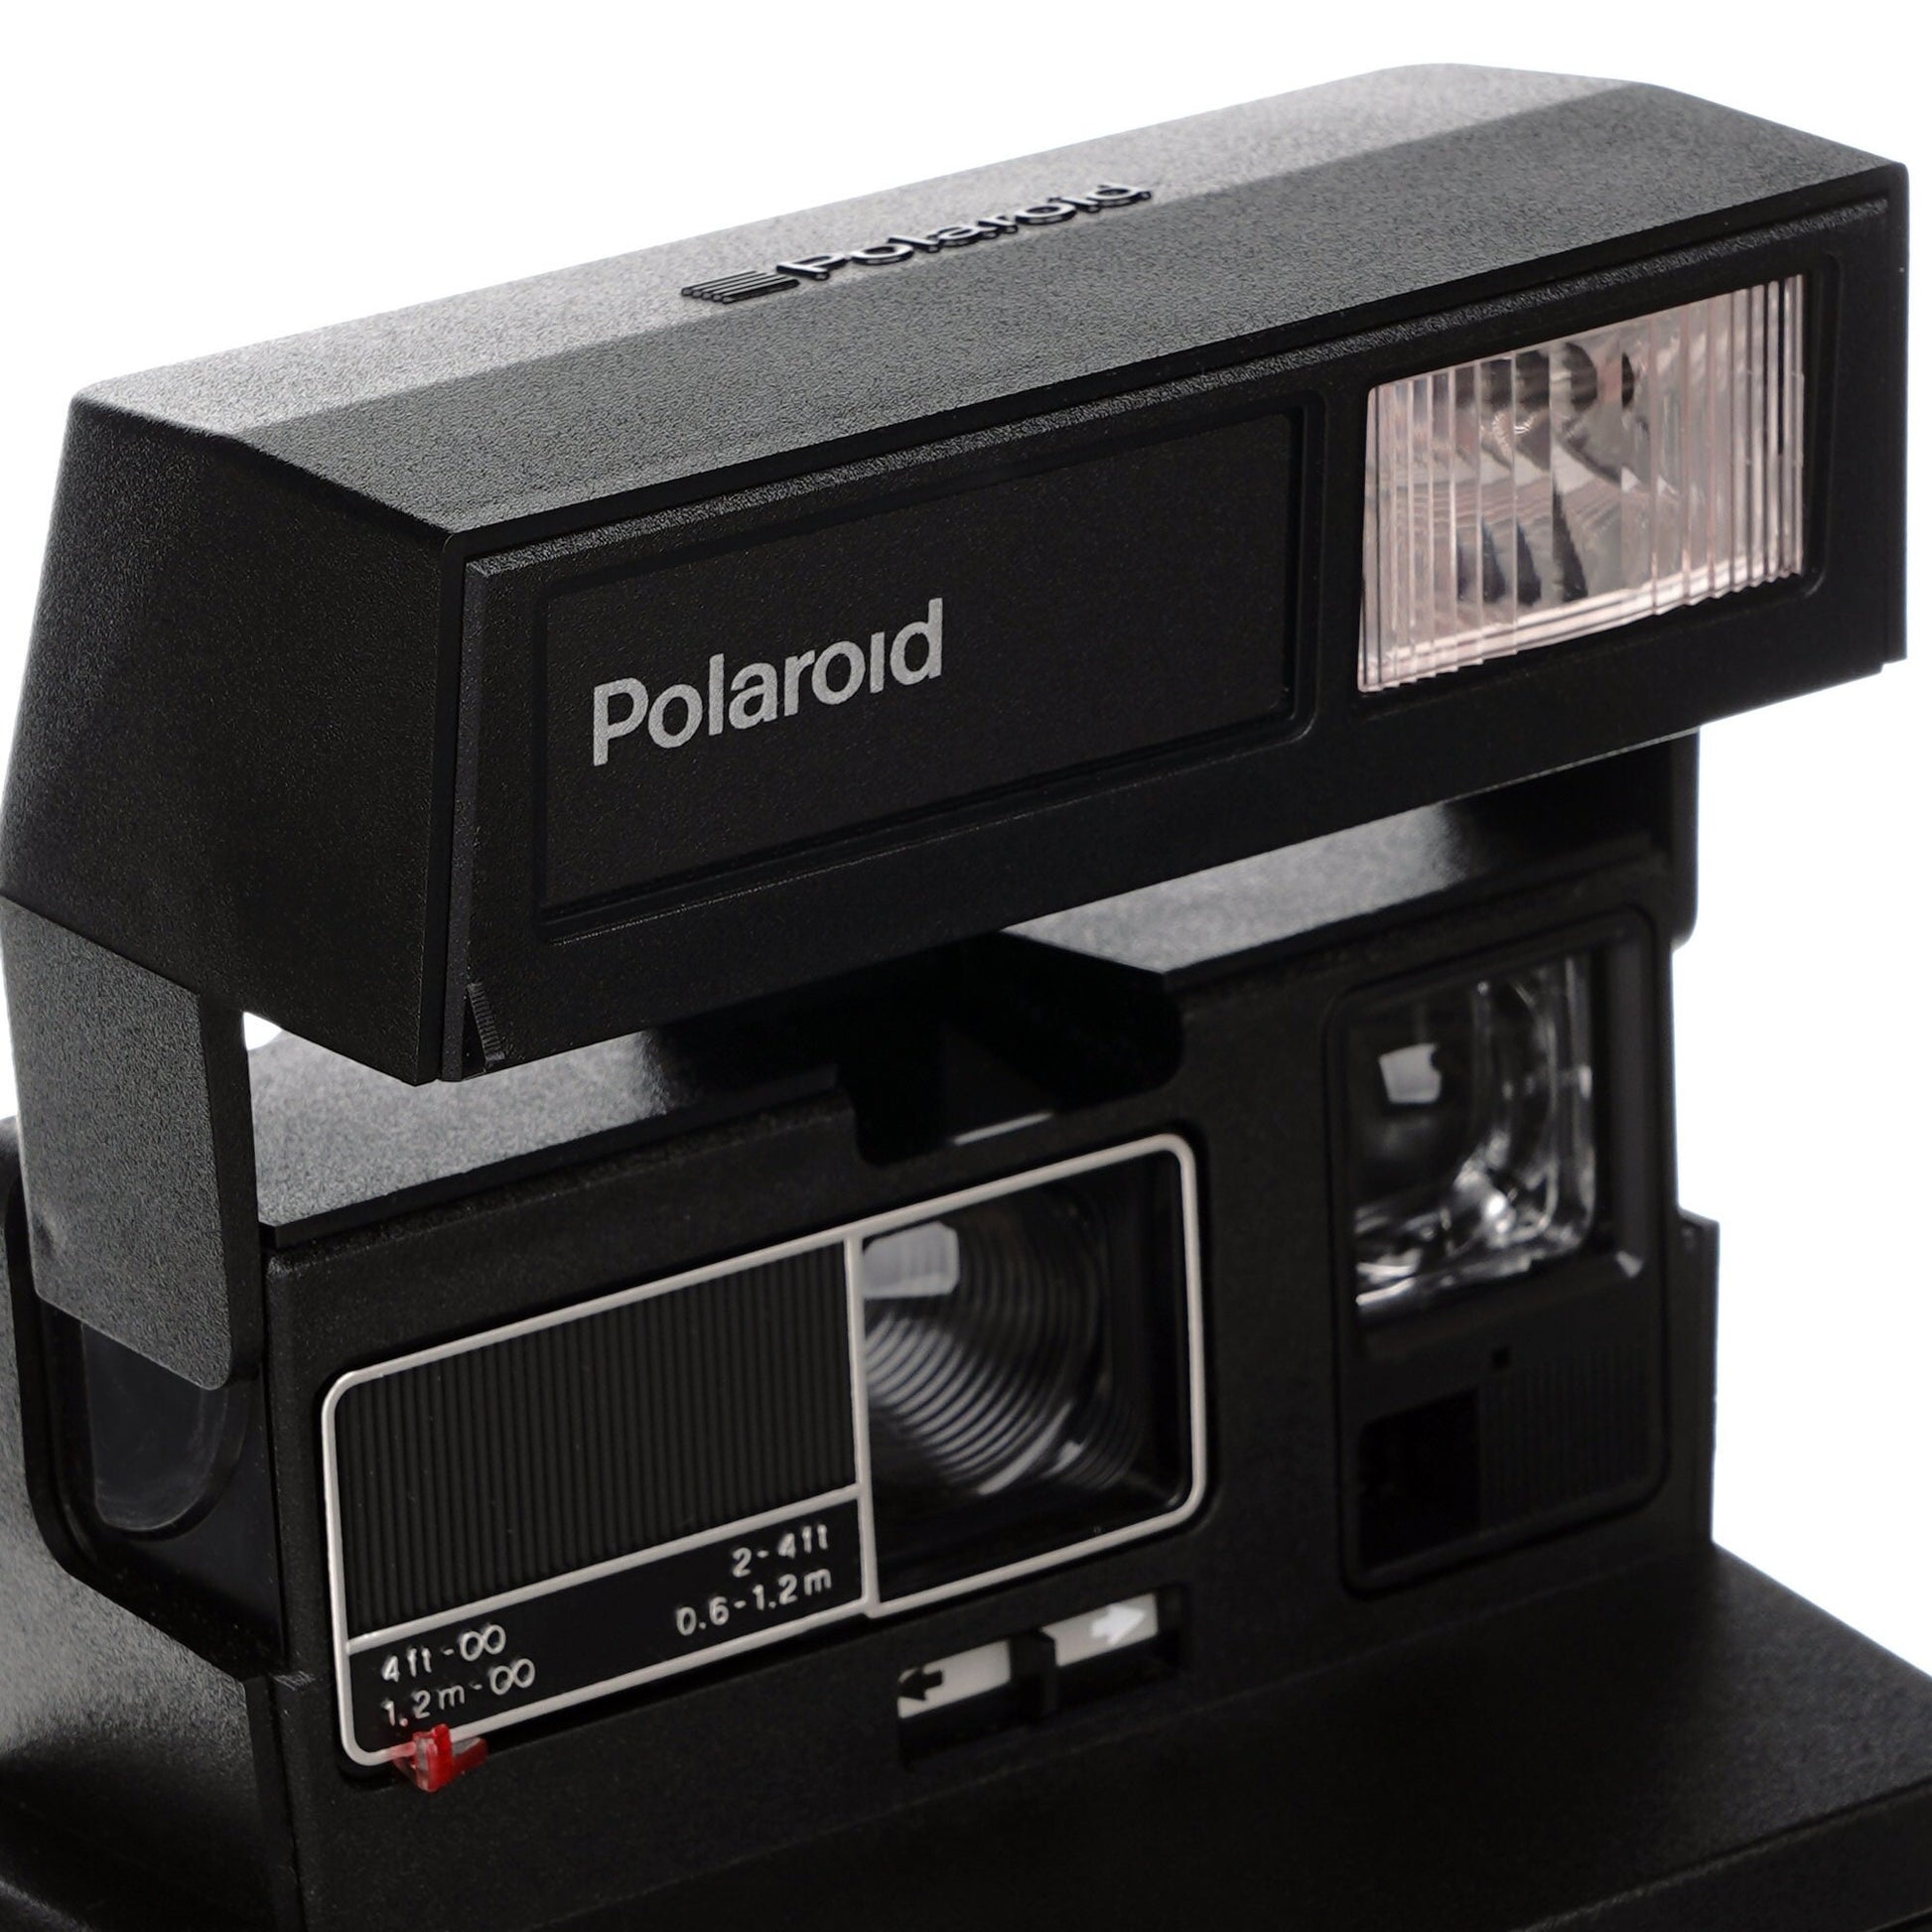 Polaroid 600 Business Edition Instant Camera Boxed Special Professional Edition - Vintage Polaroid Instant Cameras